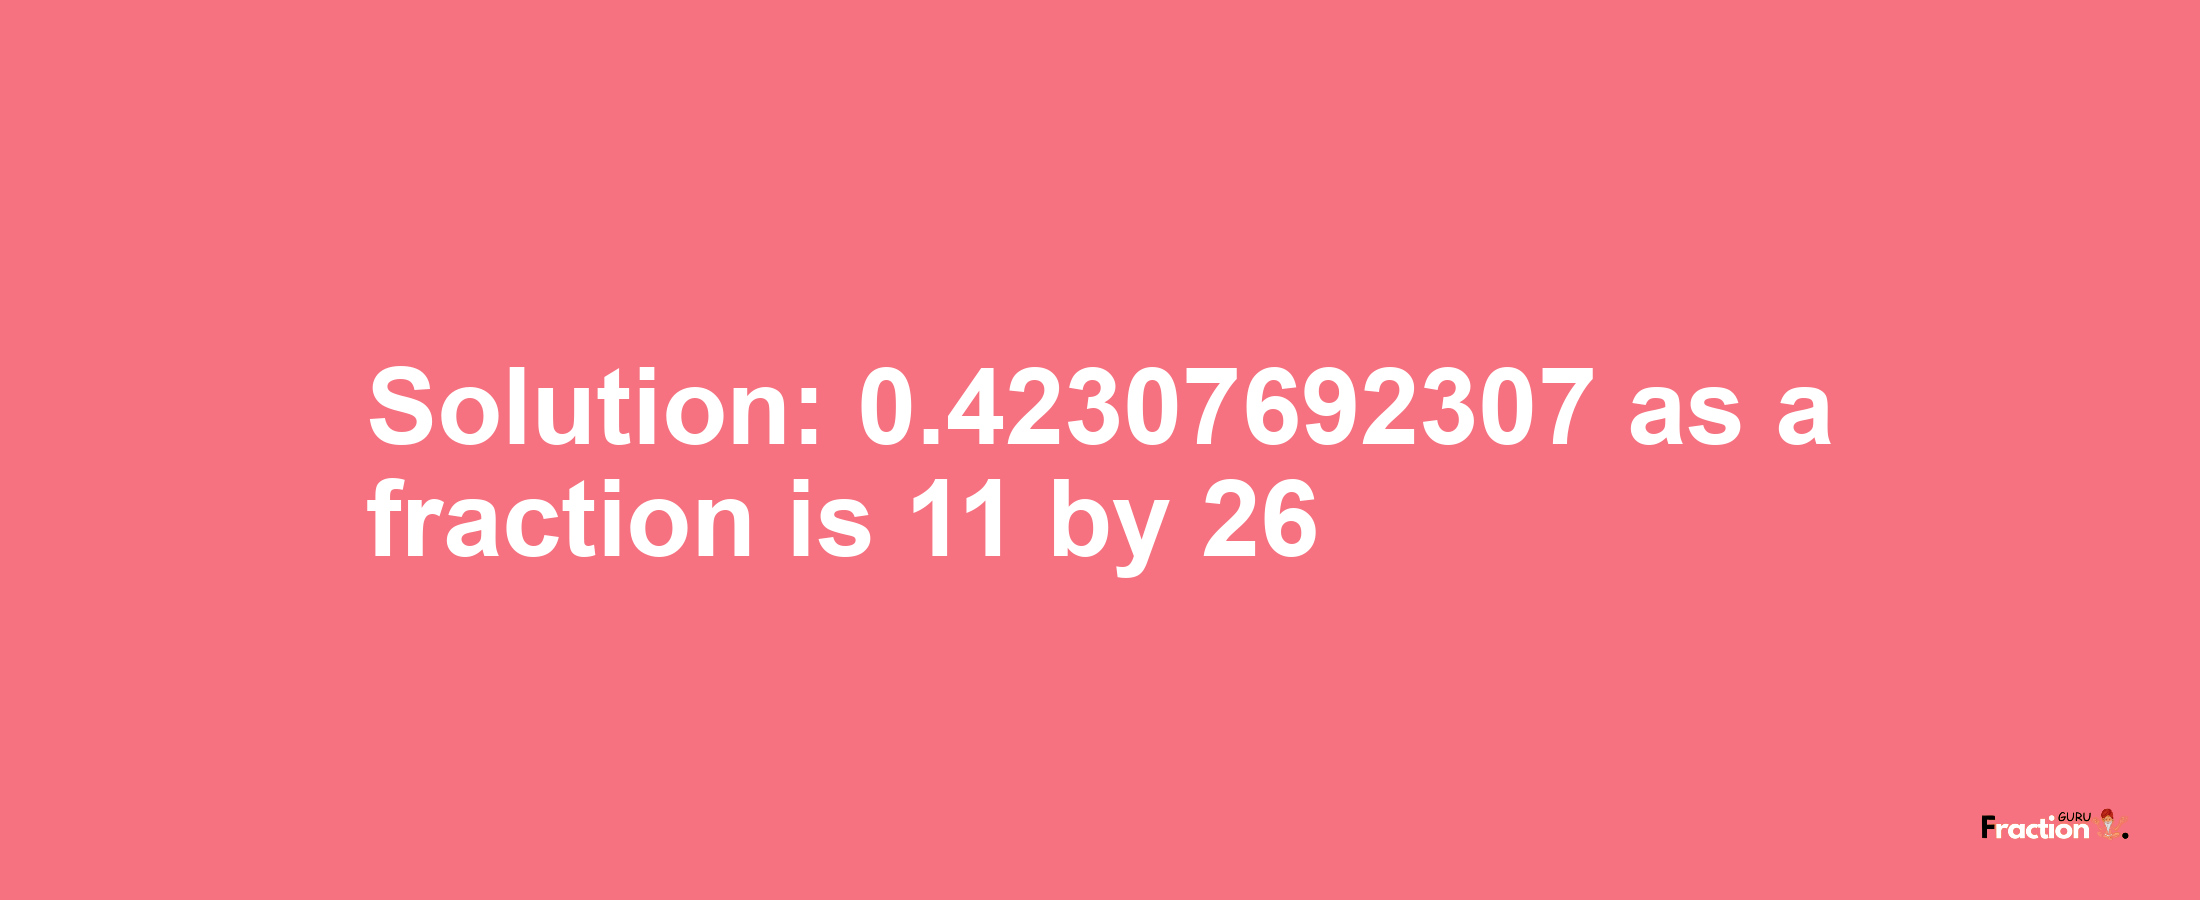 Solution:0.42307692307 as a fraction is 11/26